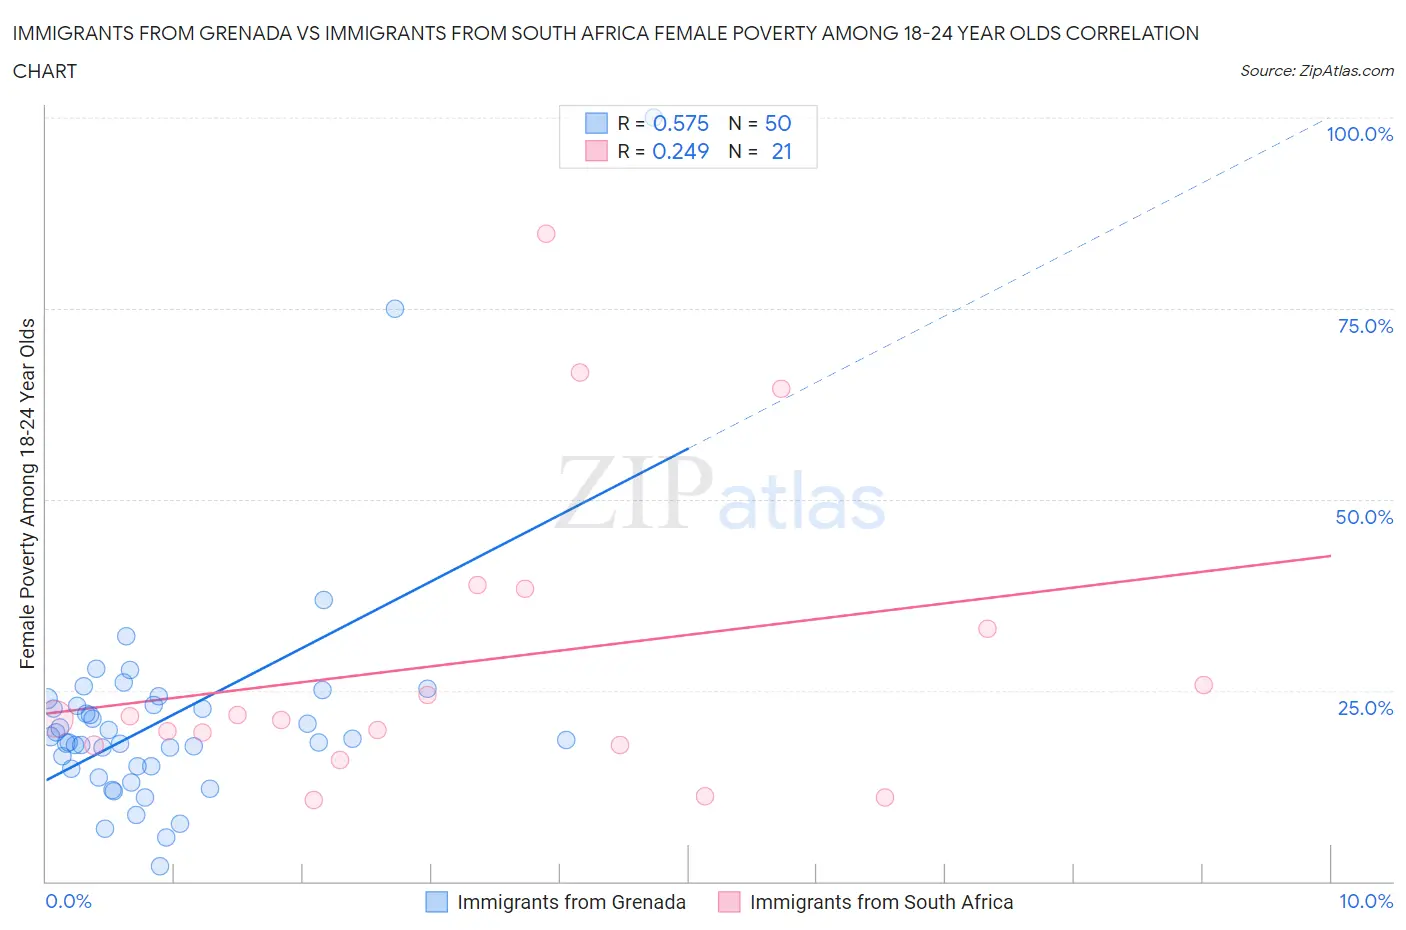 Immigrants from Grenada vs Immigrants from South Africa Female Poverty Among 18-24 Year Olds